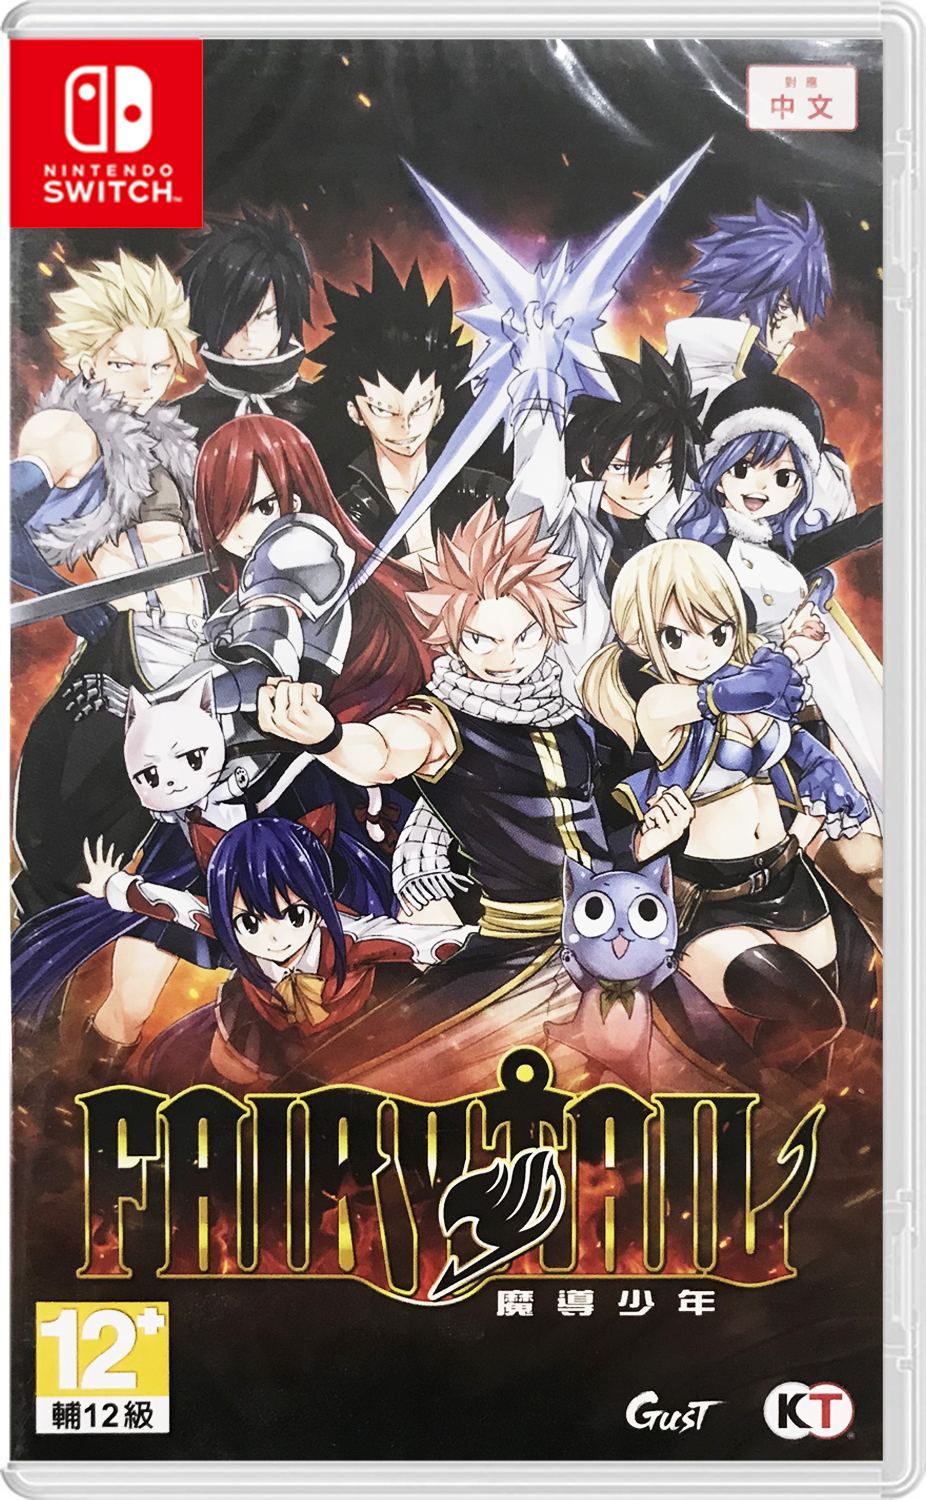 Fairy Tail (Chinese Subs) for Nintendo Switch